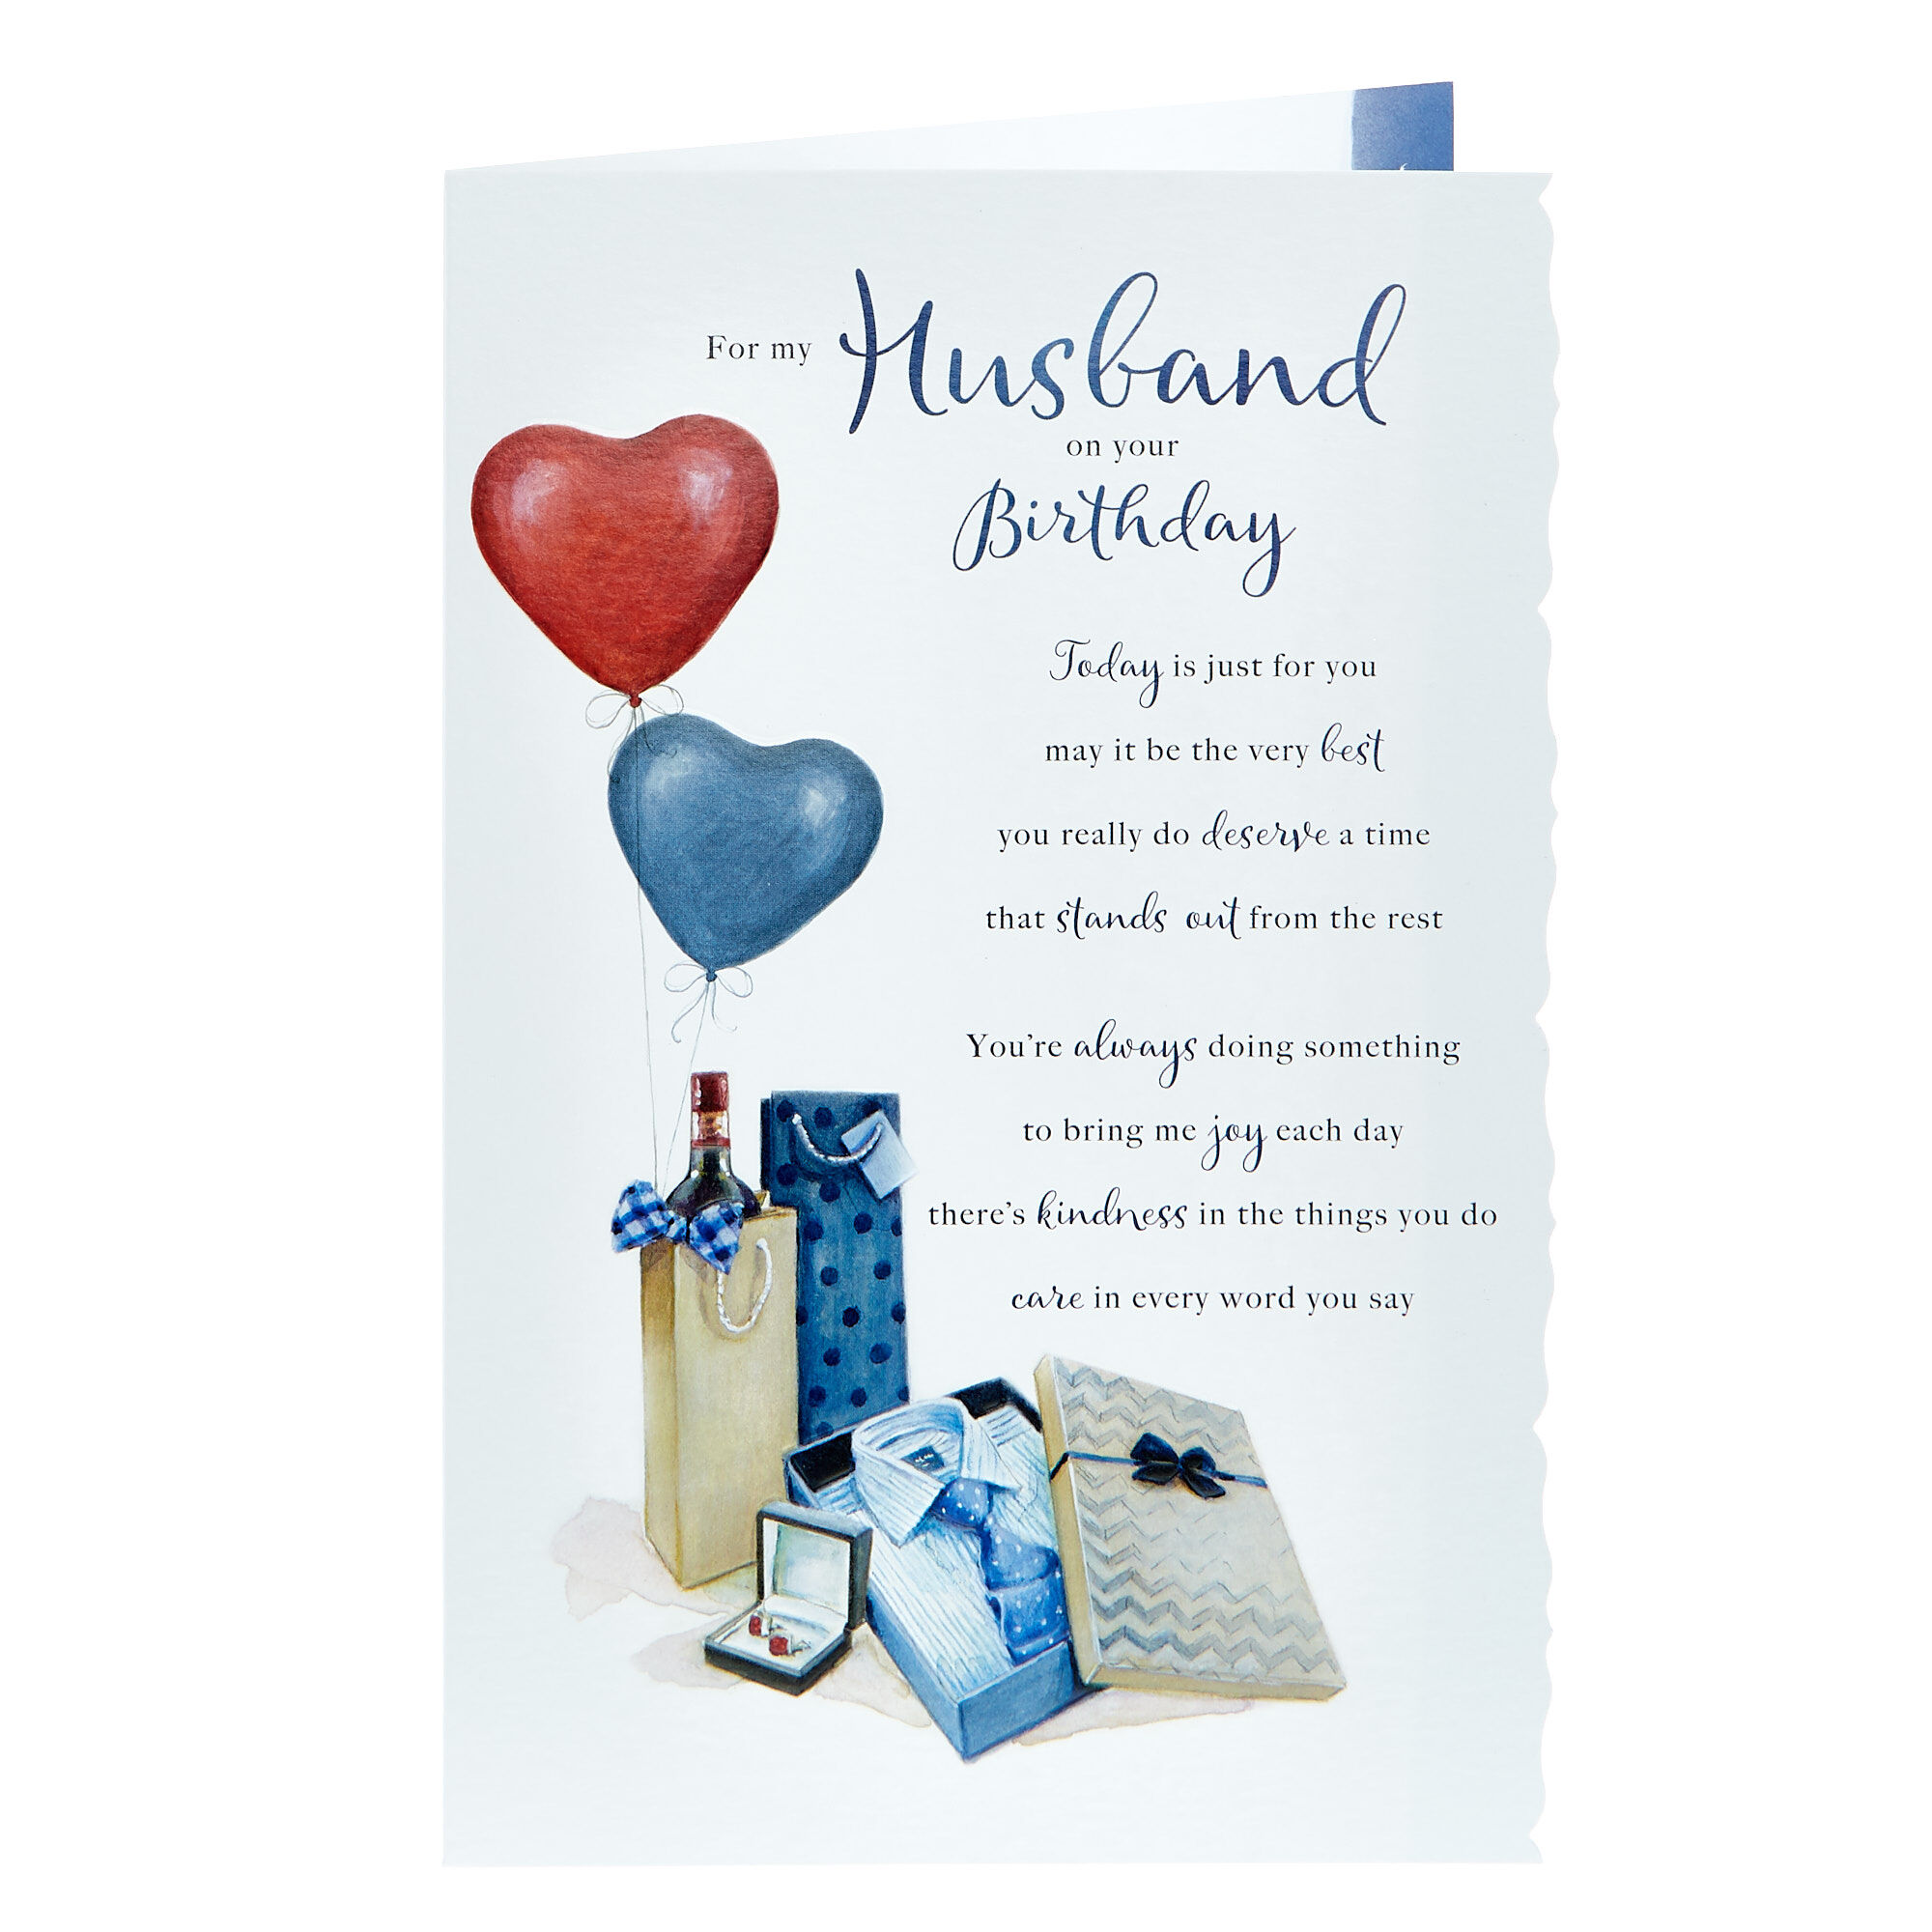 Buy Birthday Card - For My Husband for GBP 0.99